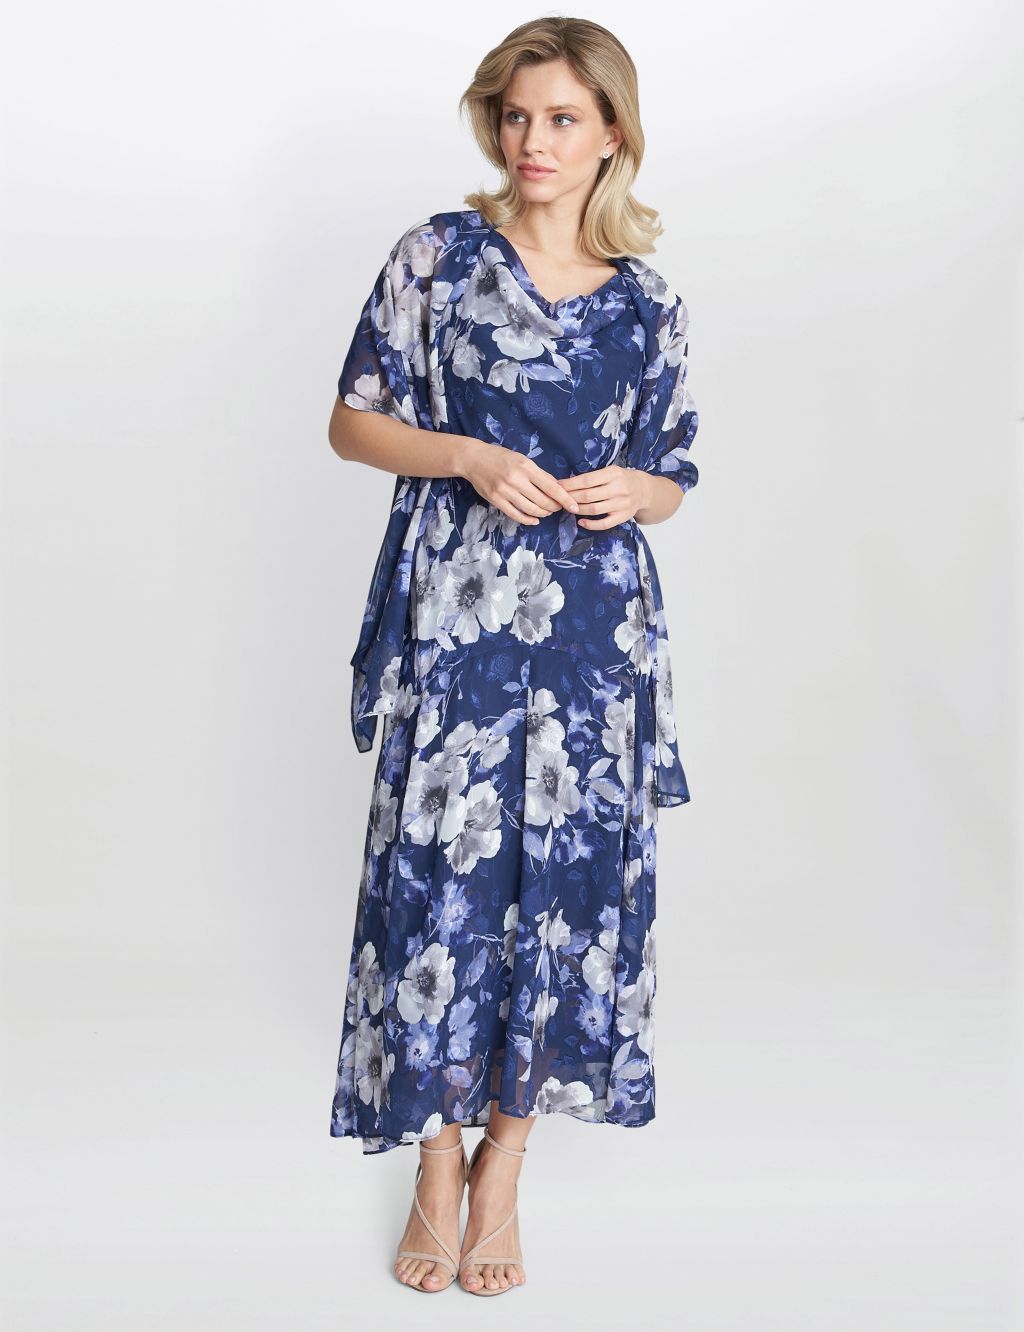 Floral Cowl Neck Maxi Swing Dress with Shawl image 1